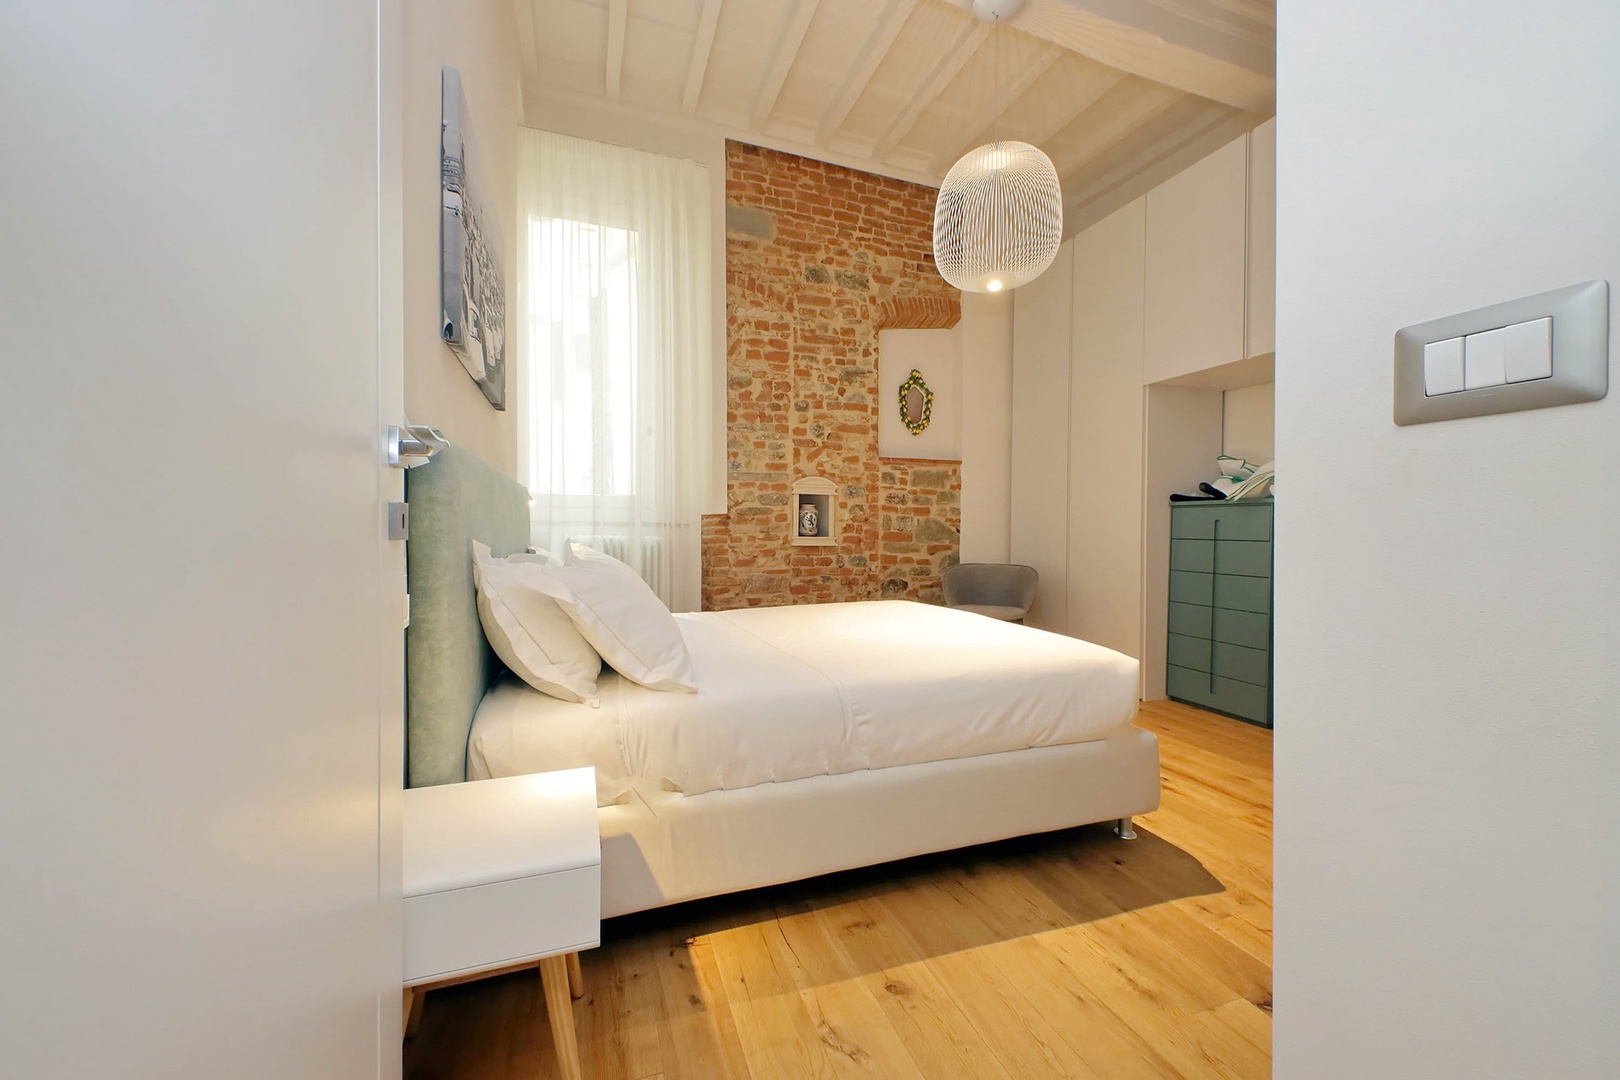 Exposed brick is carried over into the bedroom